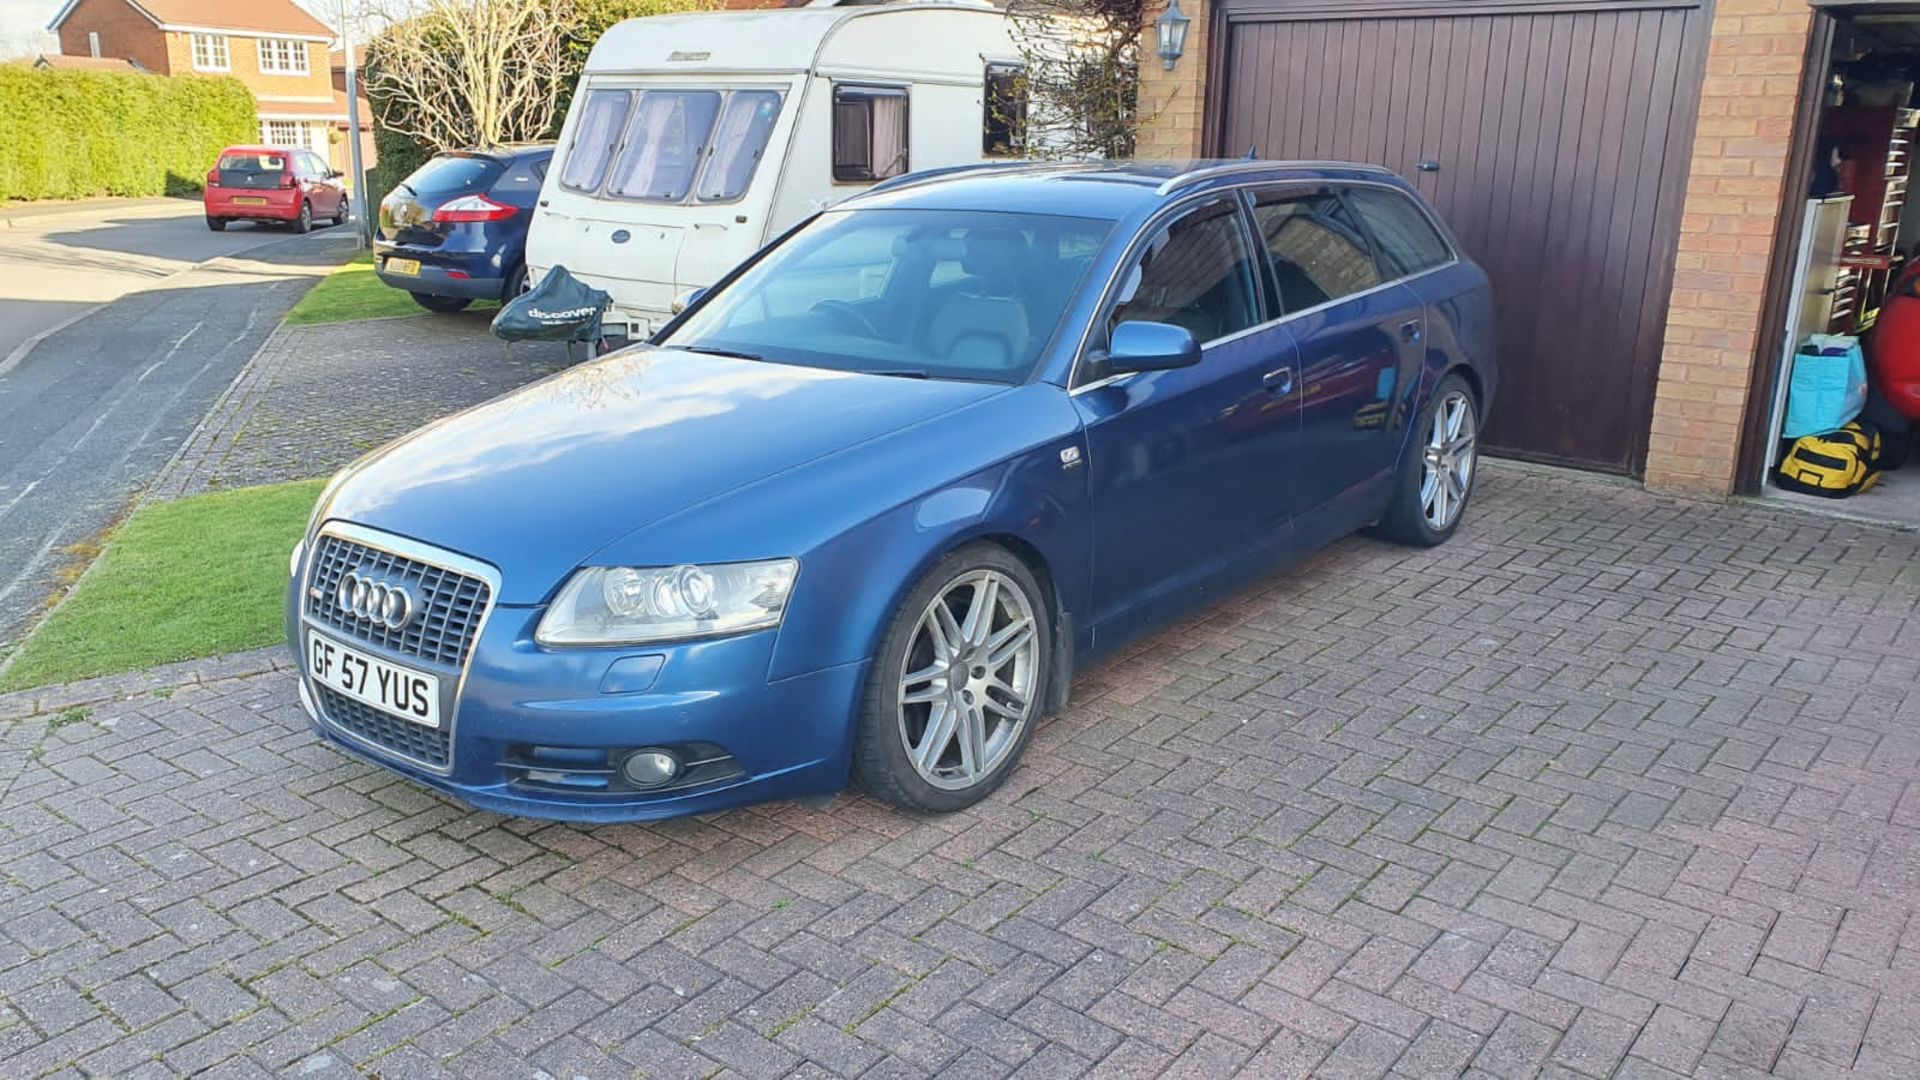 AUDI A6 AVANT  2.7 TDi Lemans Edition Quattro Auto 2007 (57 Plate) 210,578 miles (May increase - Image 8 of 23